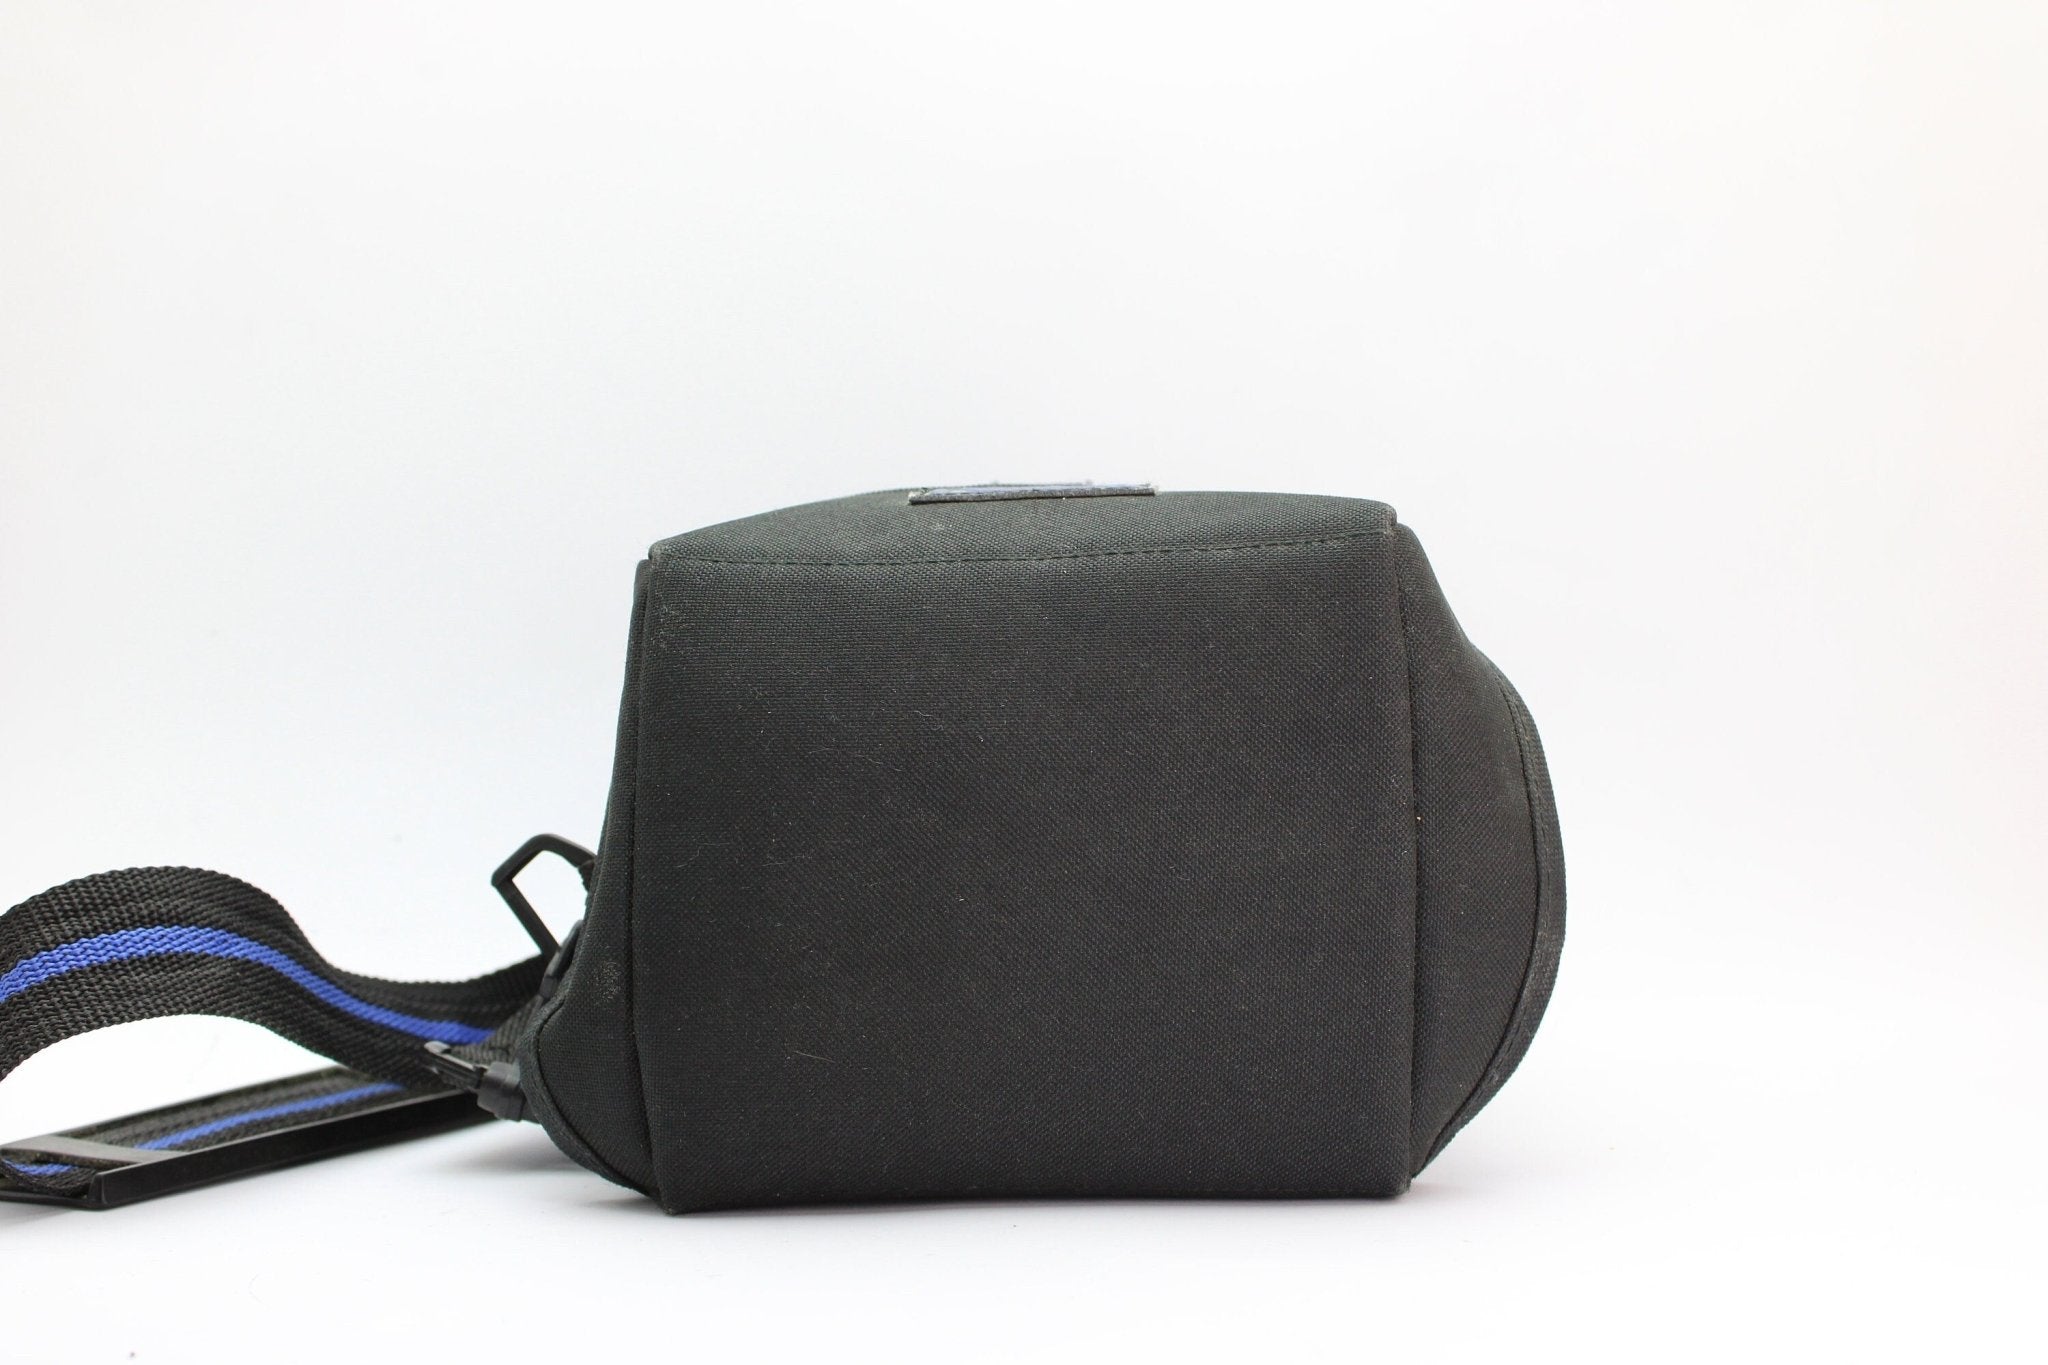 Point Professional Camera Bag - Point Professional